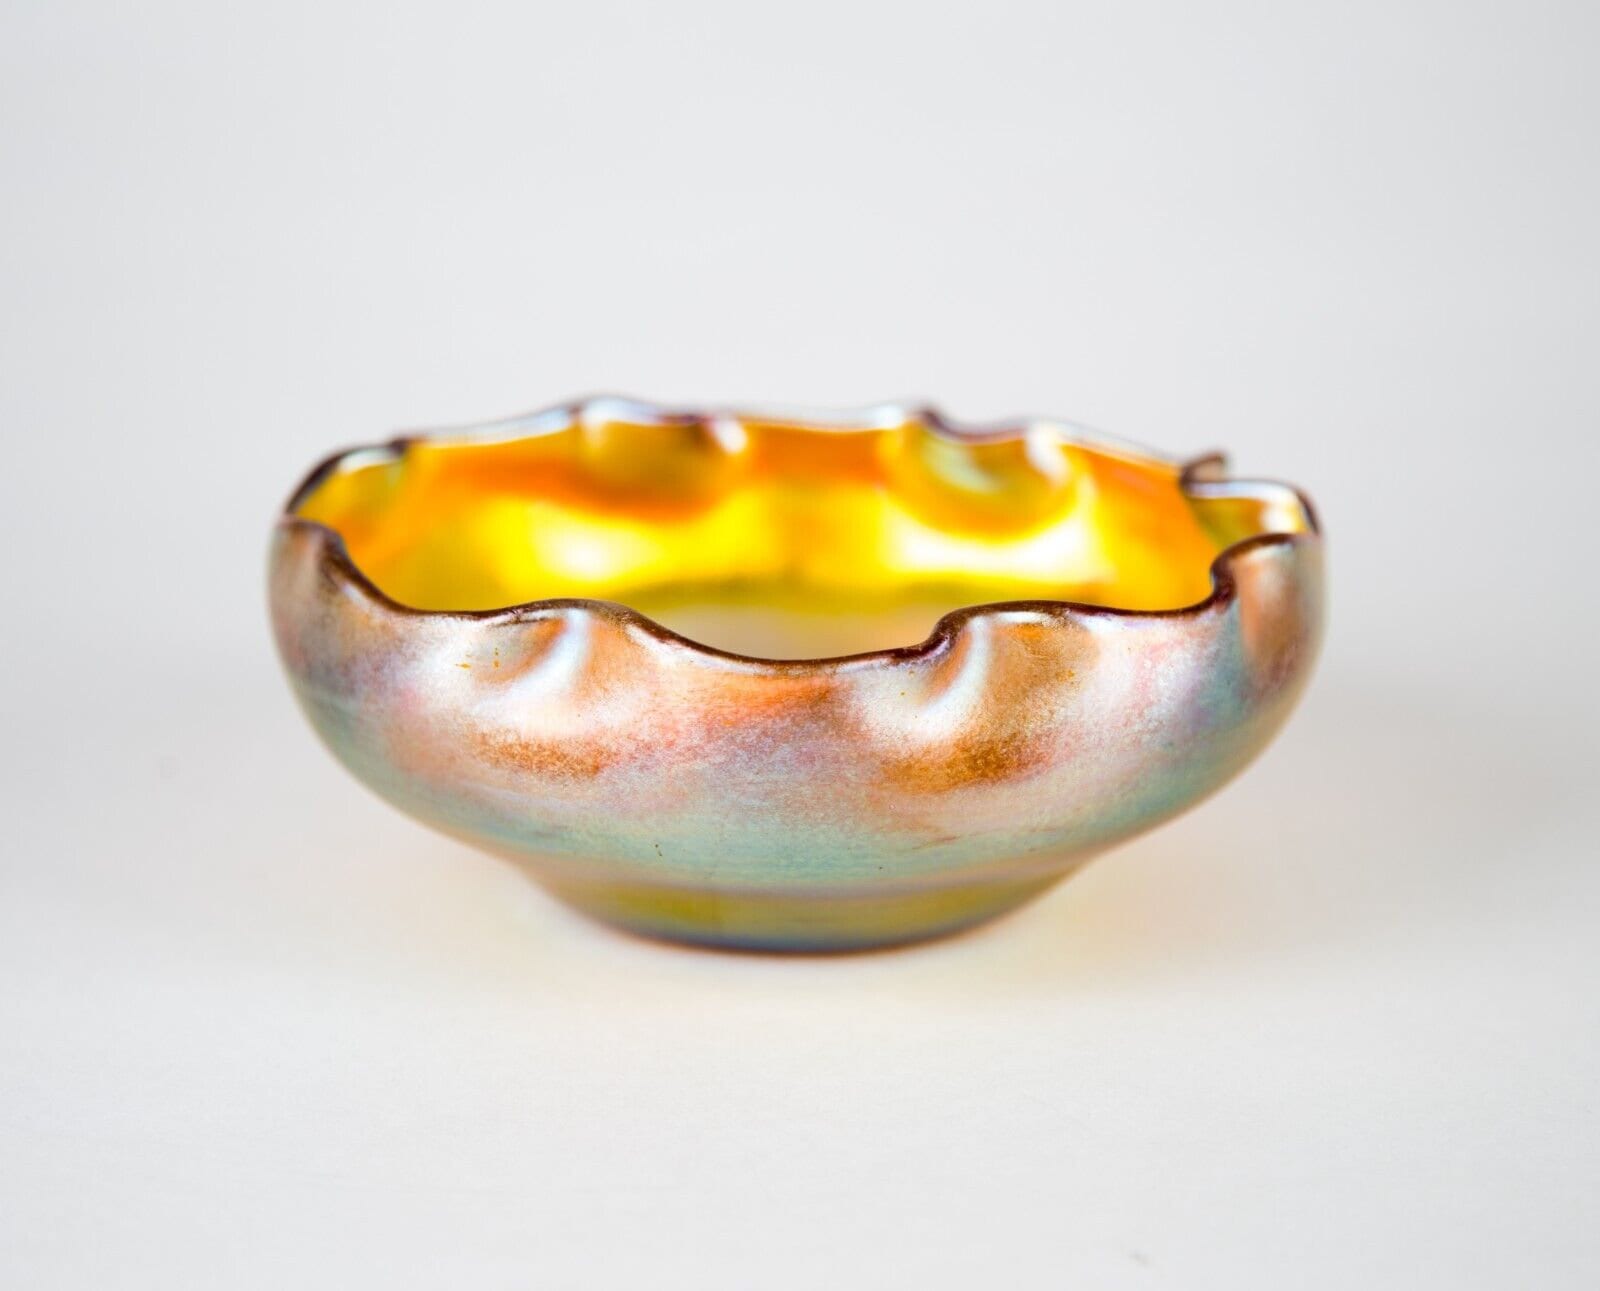 Louis Comfort Tiffany - Arts & Crafts Ring with Tiffany Favrile Glass